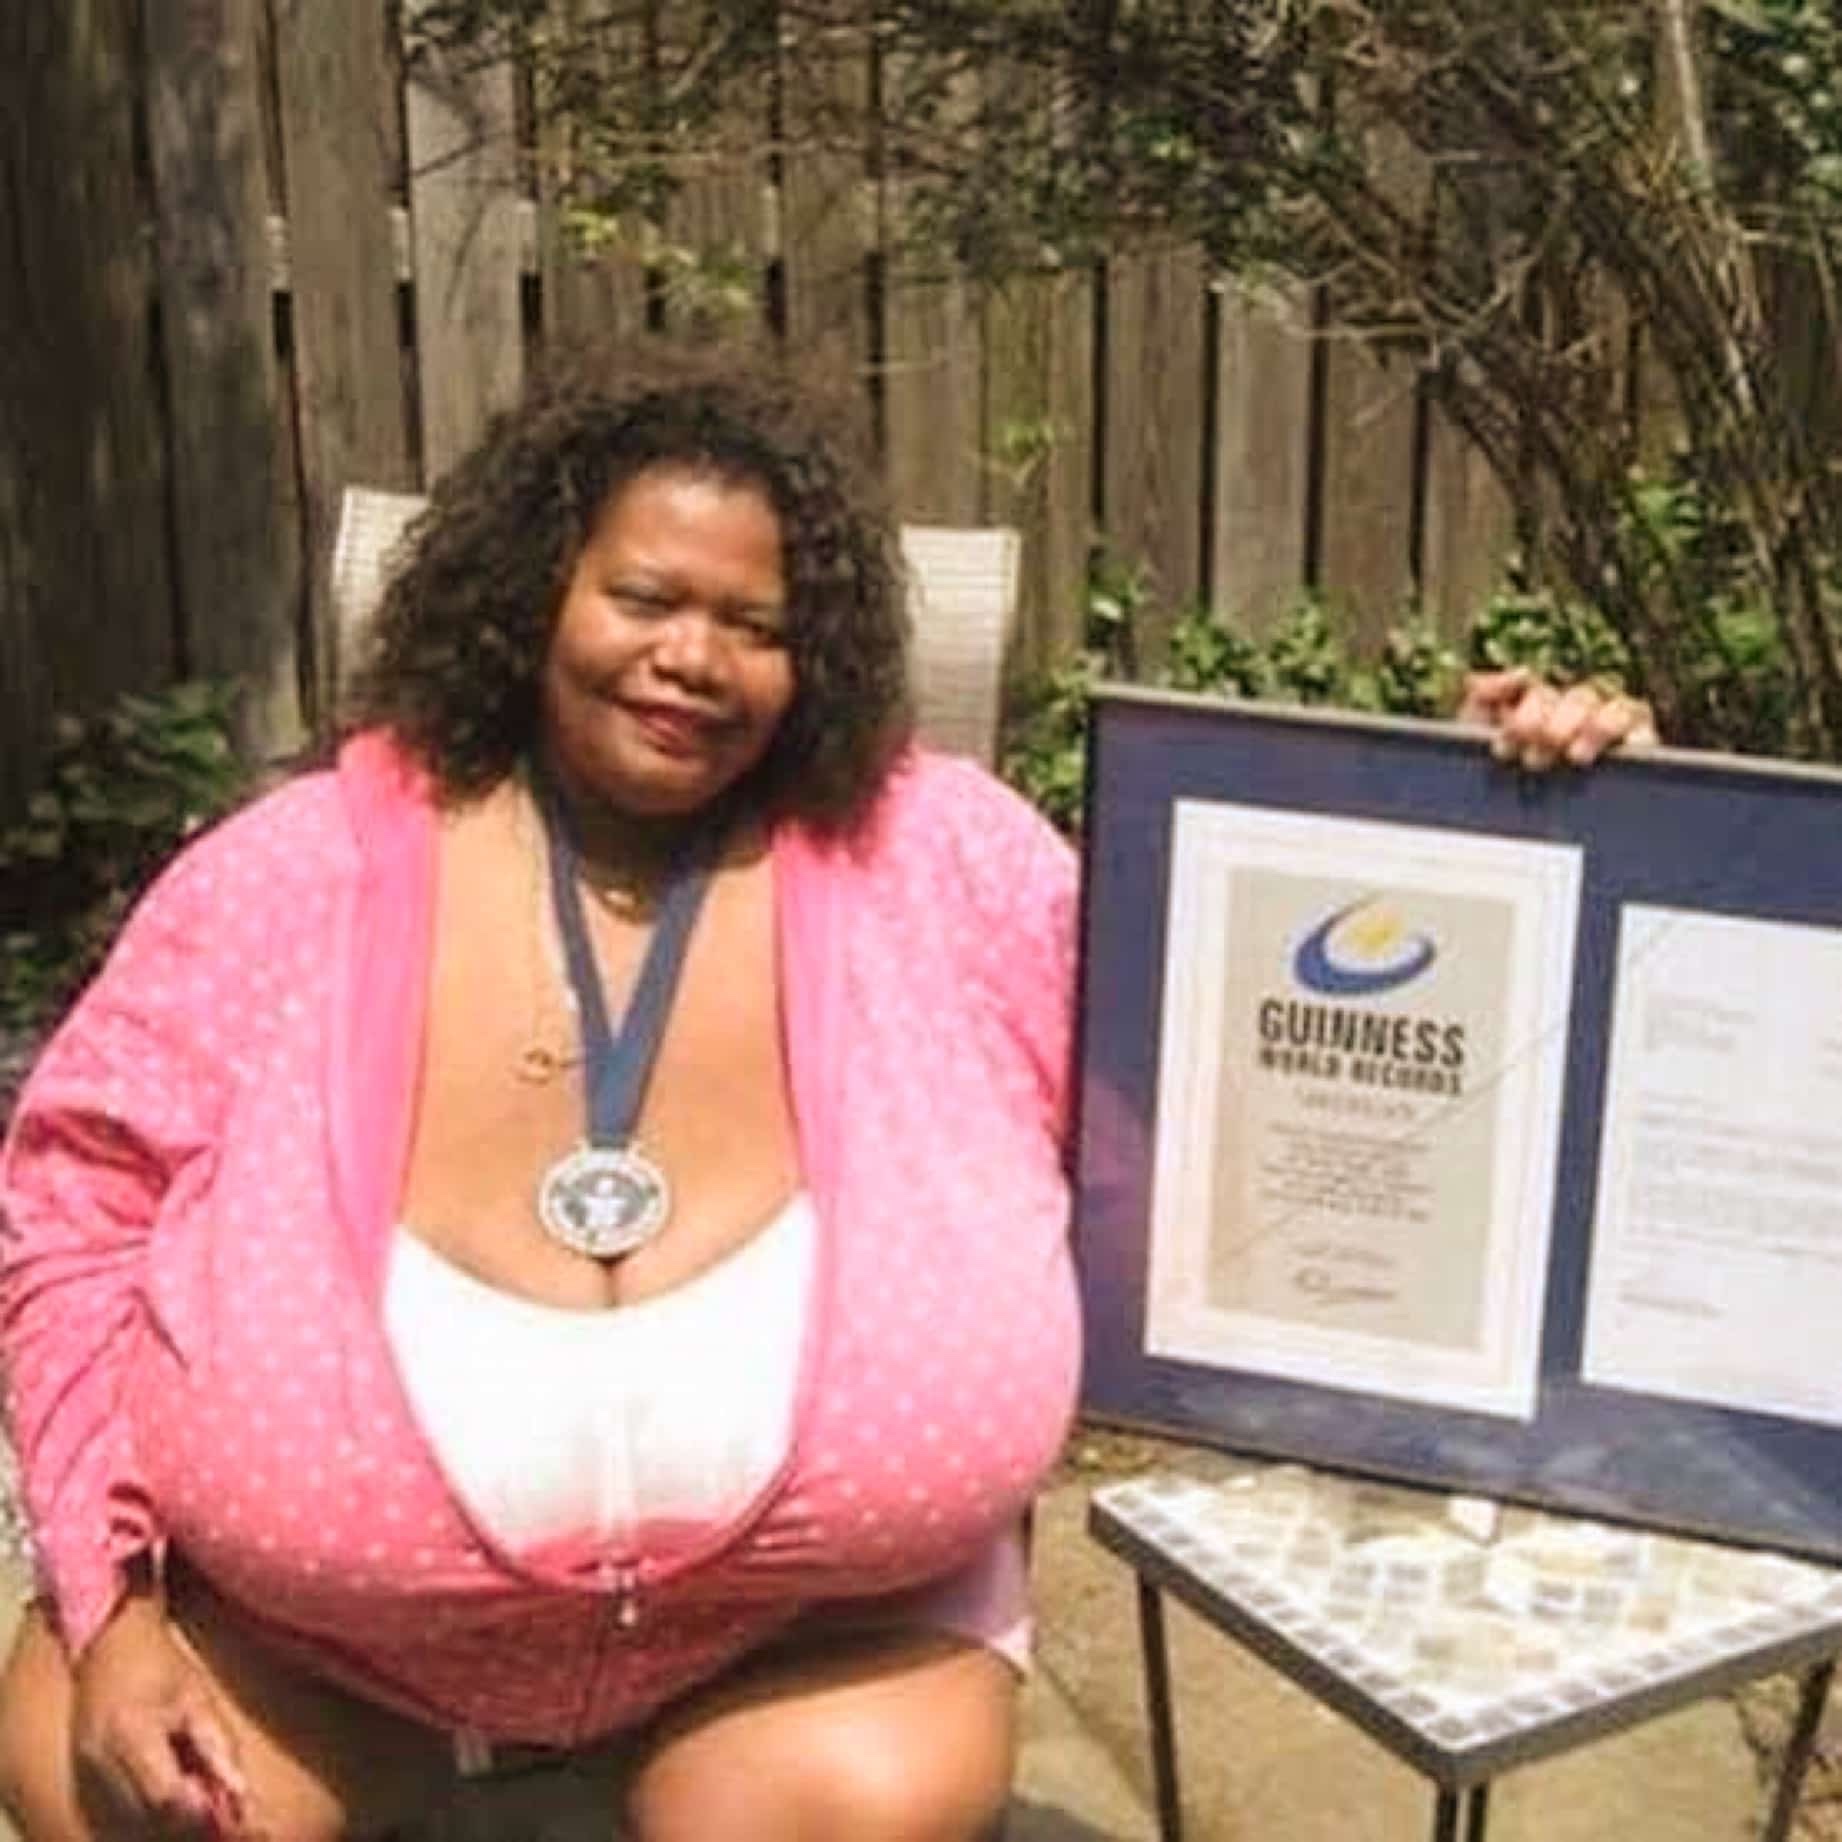 Annie Hawkins: Meet the Woman with the Largest Natural Breasts in the World